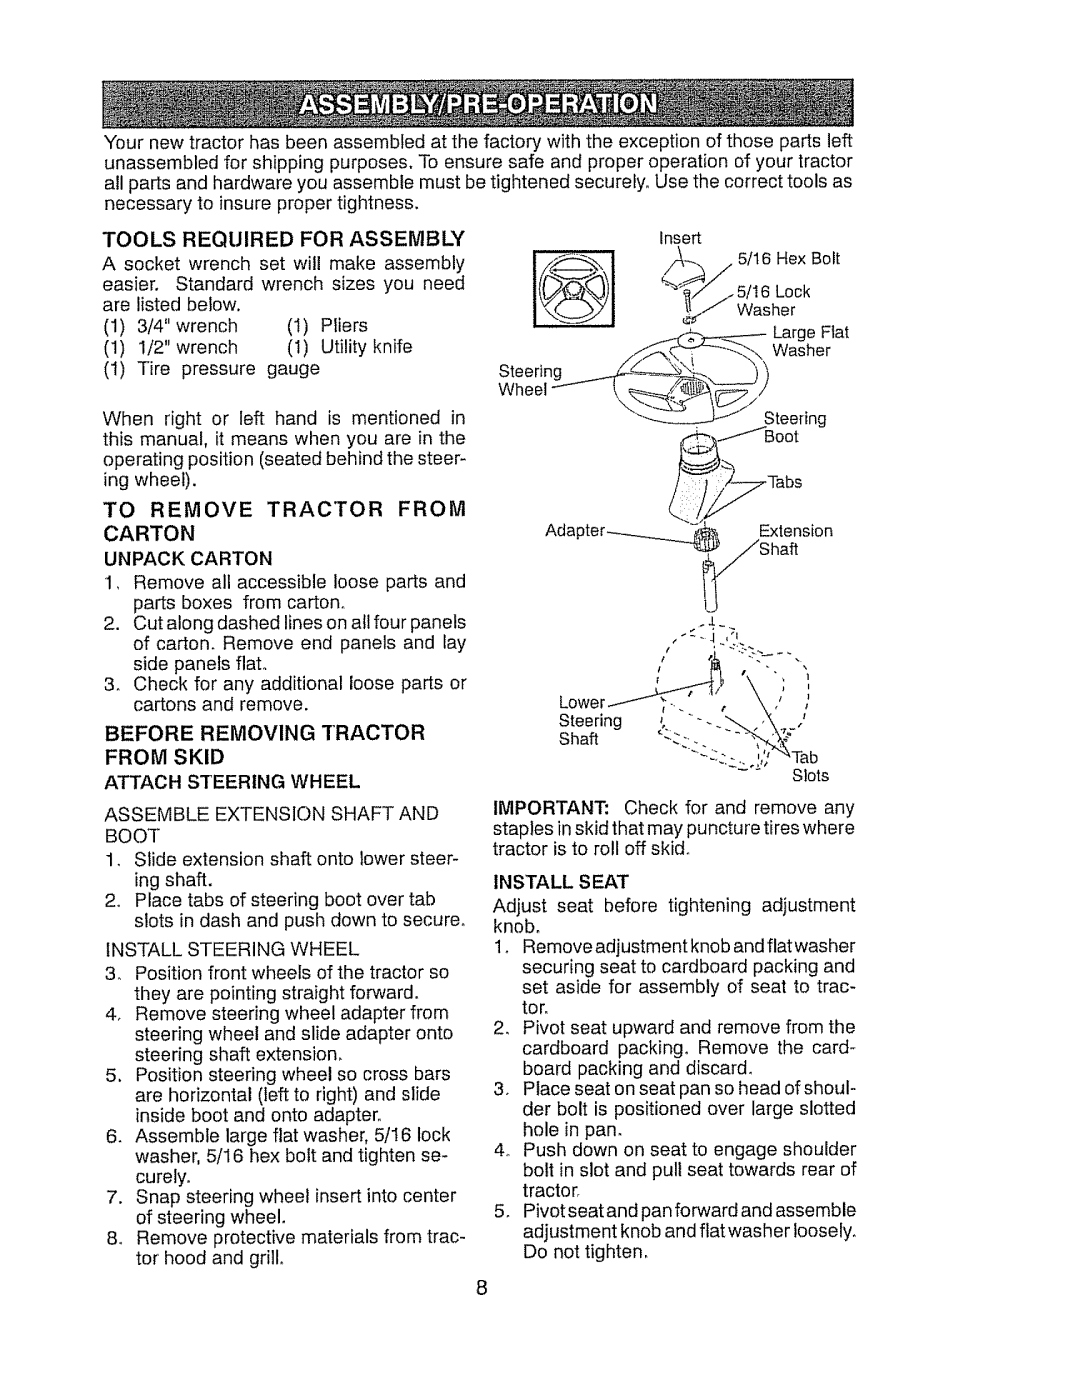 Craftsman 917.289030, 917.289031 owner manual Before Removing Tractor From Skid, Attach Steering Wheel 